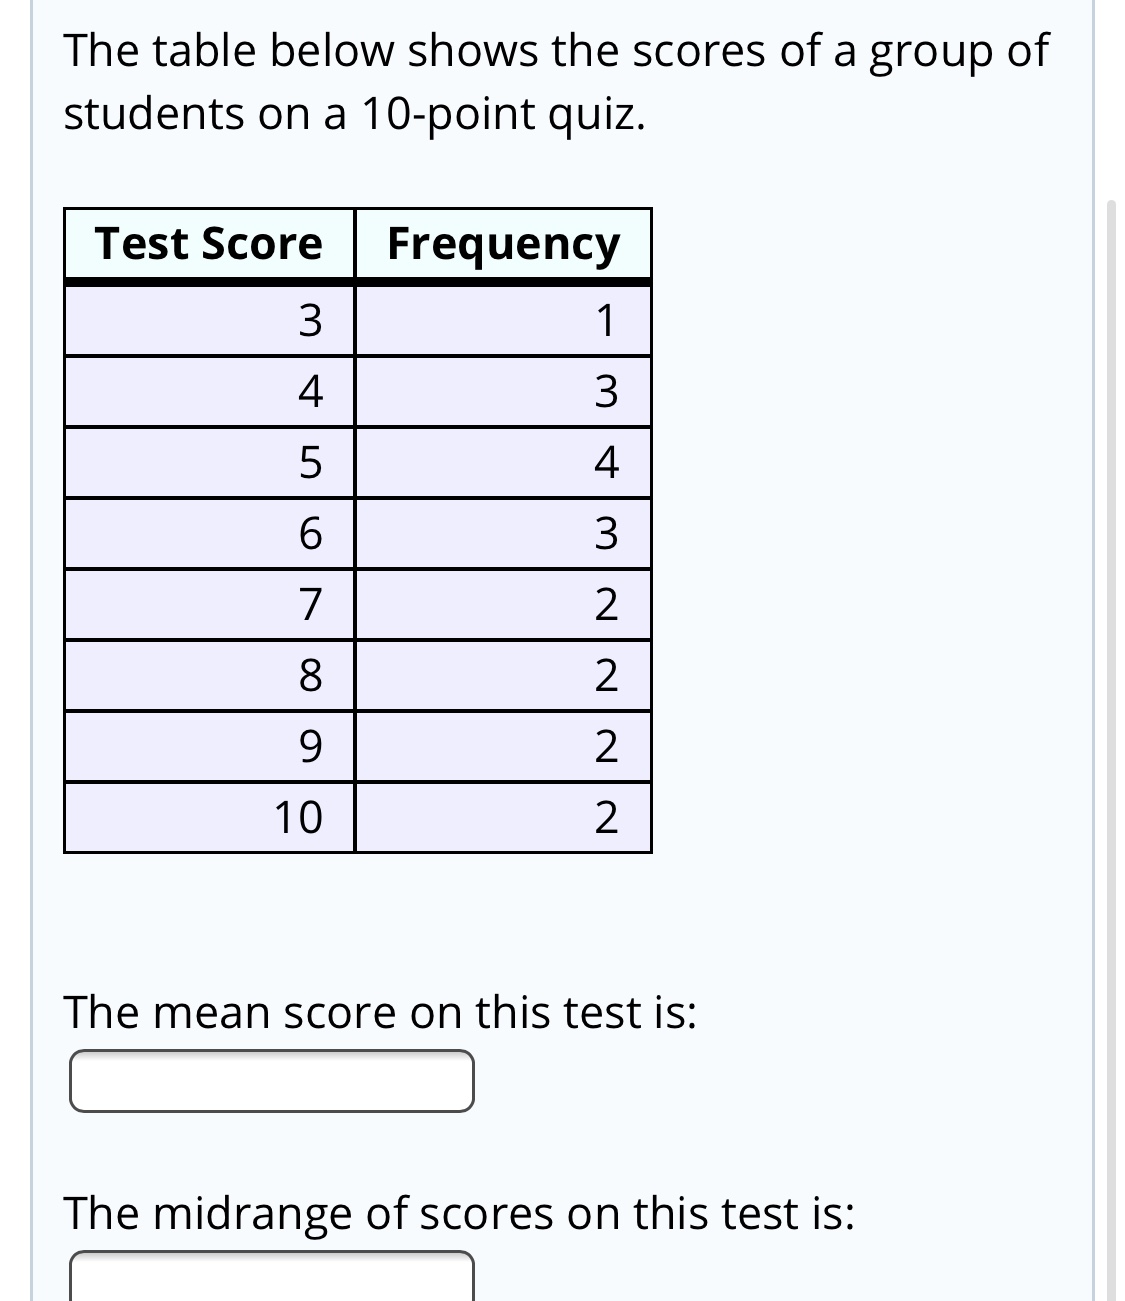 answered-the-mean-score-on-this-test-is-the-bartleby